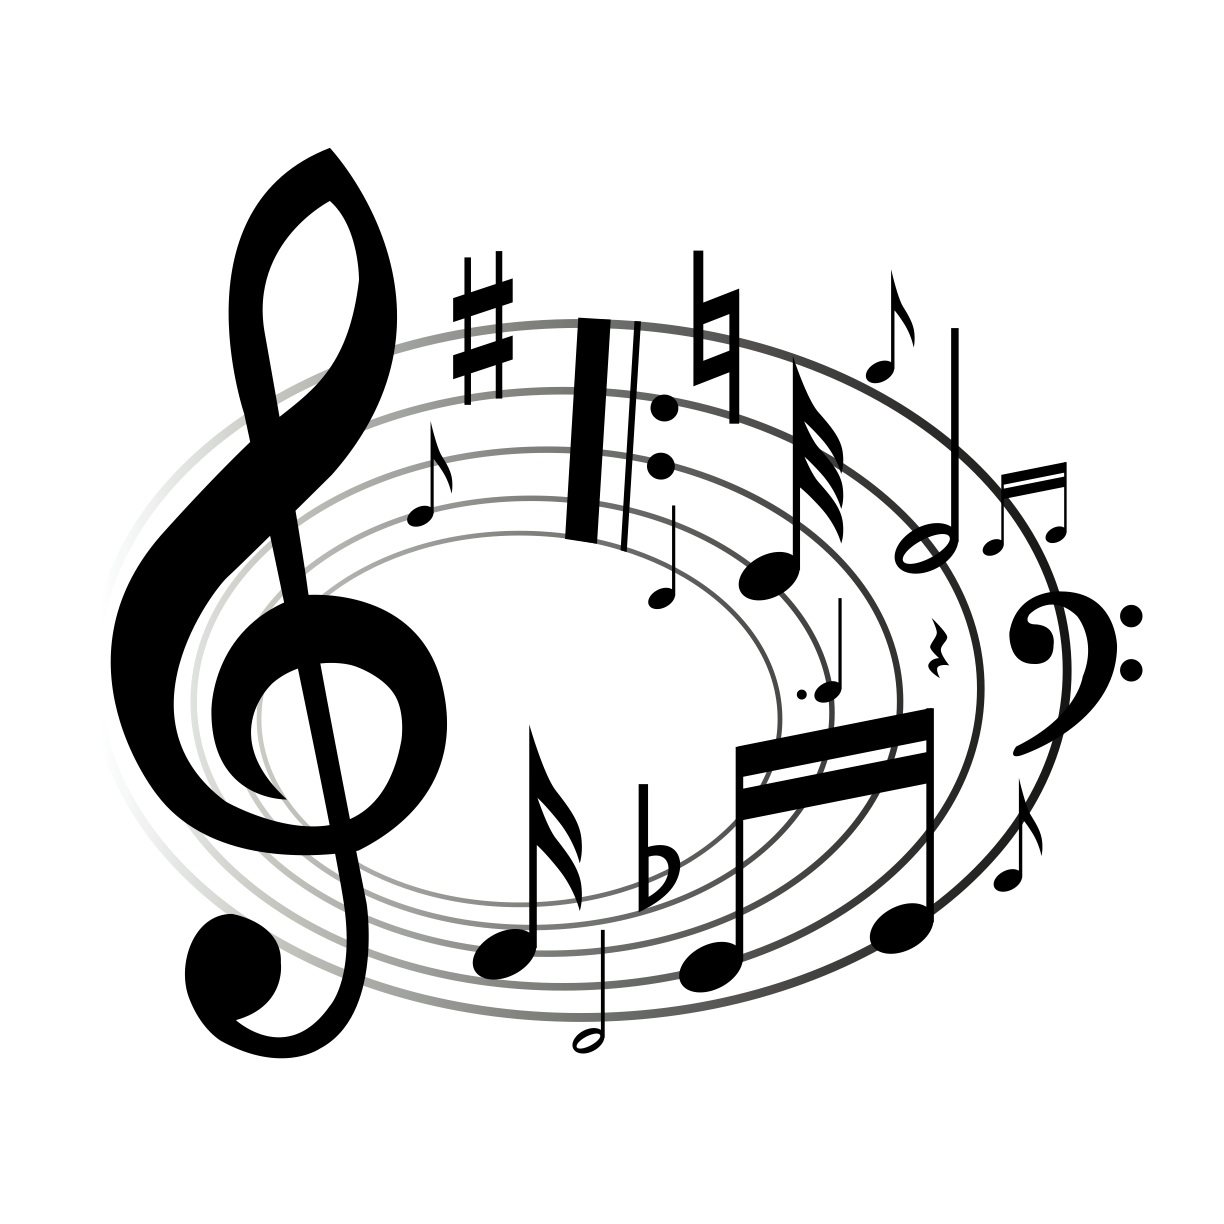 music notes clip art free download - photo #7